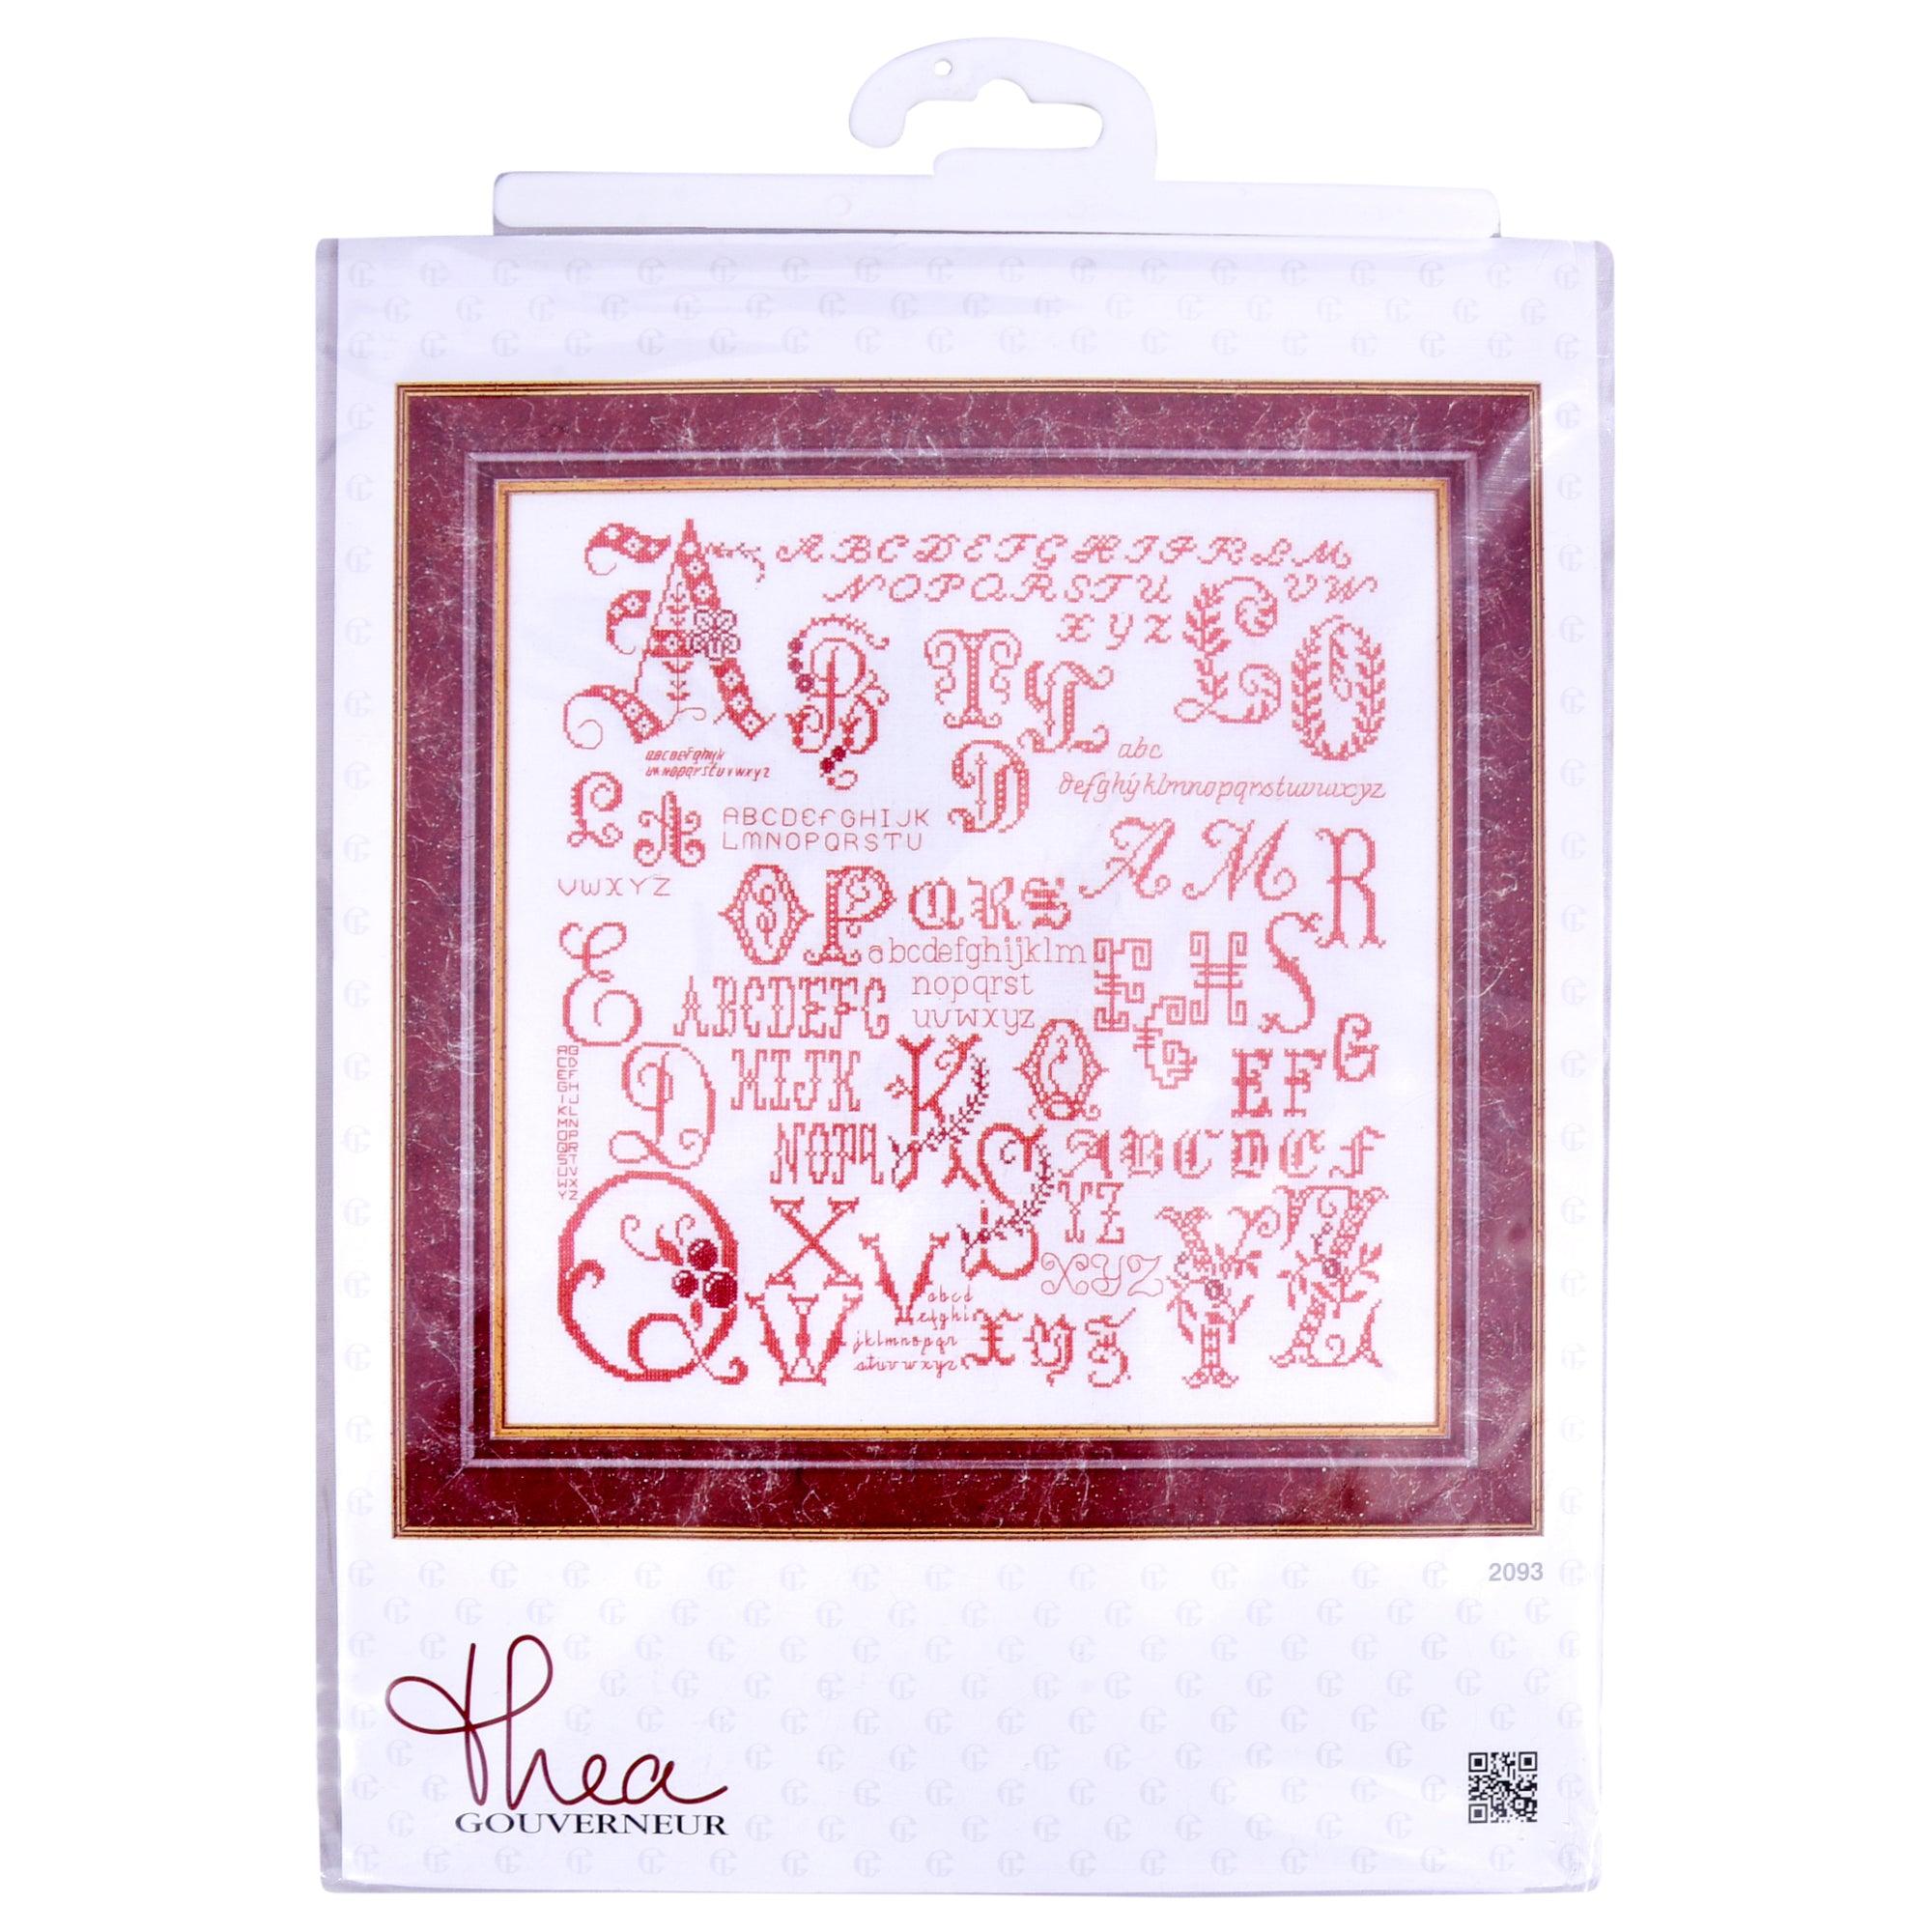 Thea Gouverneur - Counted Cross Stitch Kit - Antique Character Sampler - Aida - 18 count - 2093A - Thea Gouverneur Since 1959